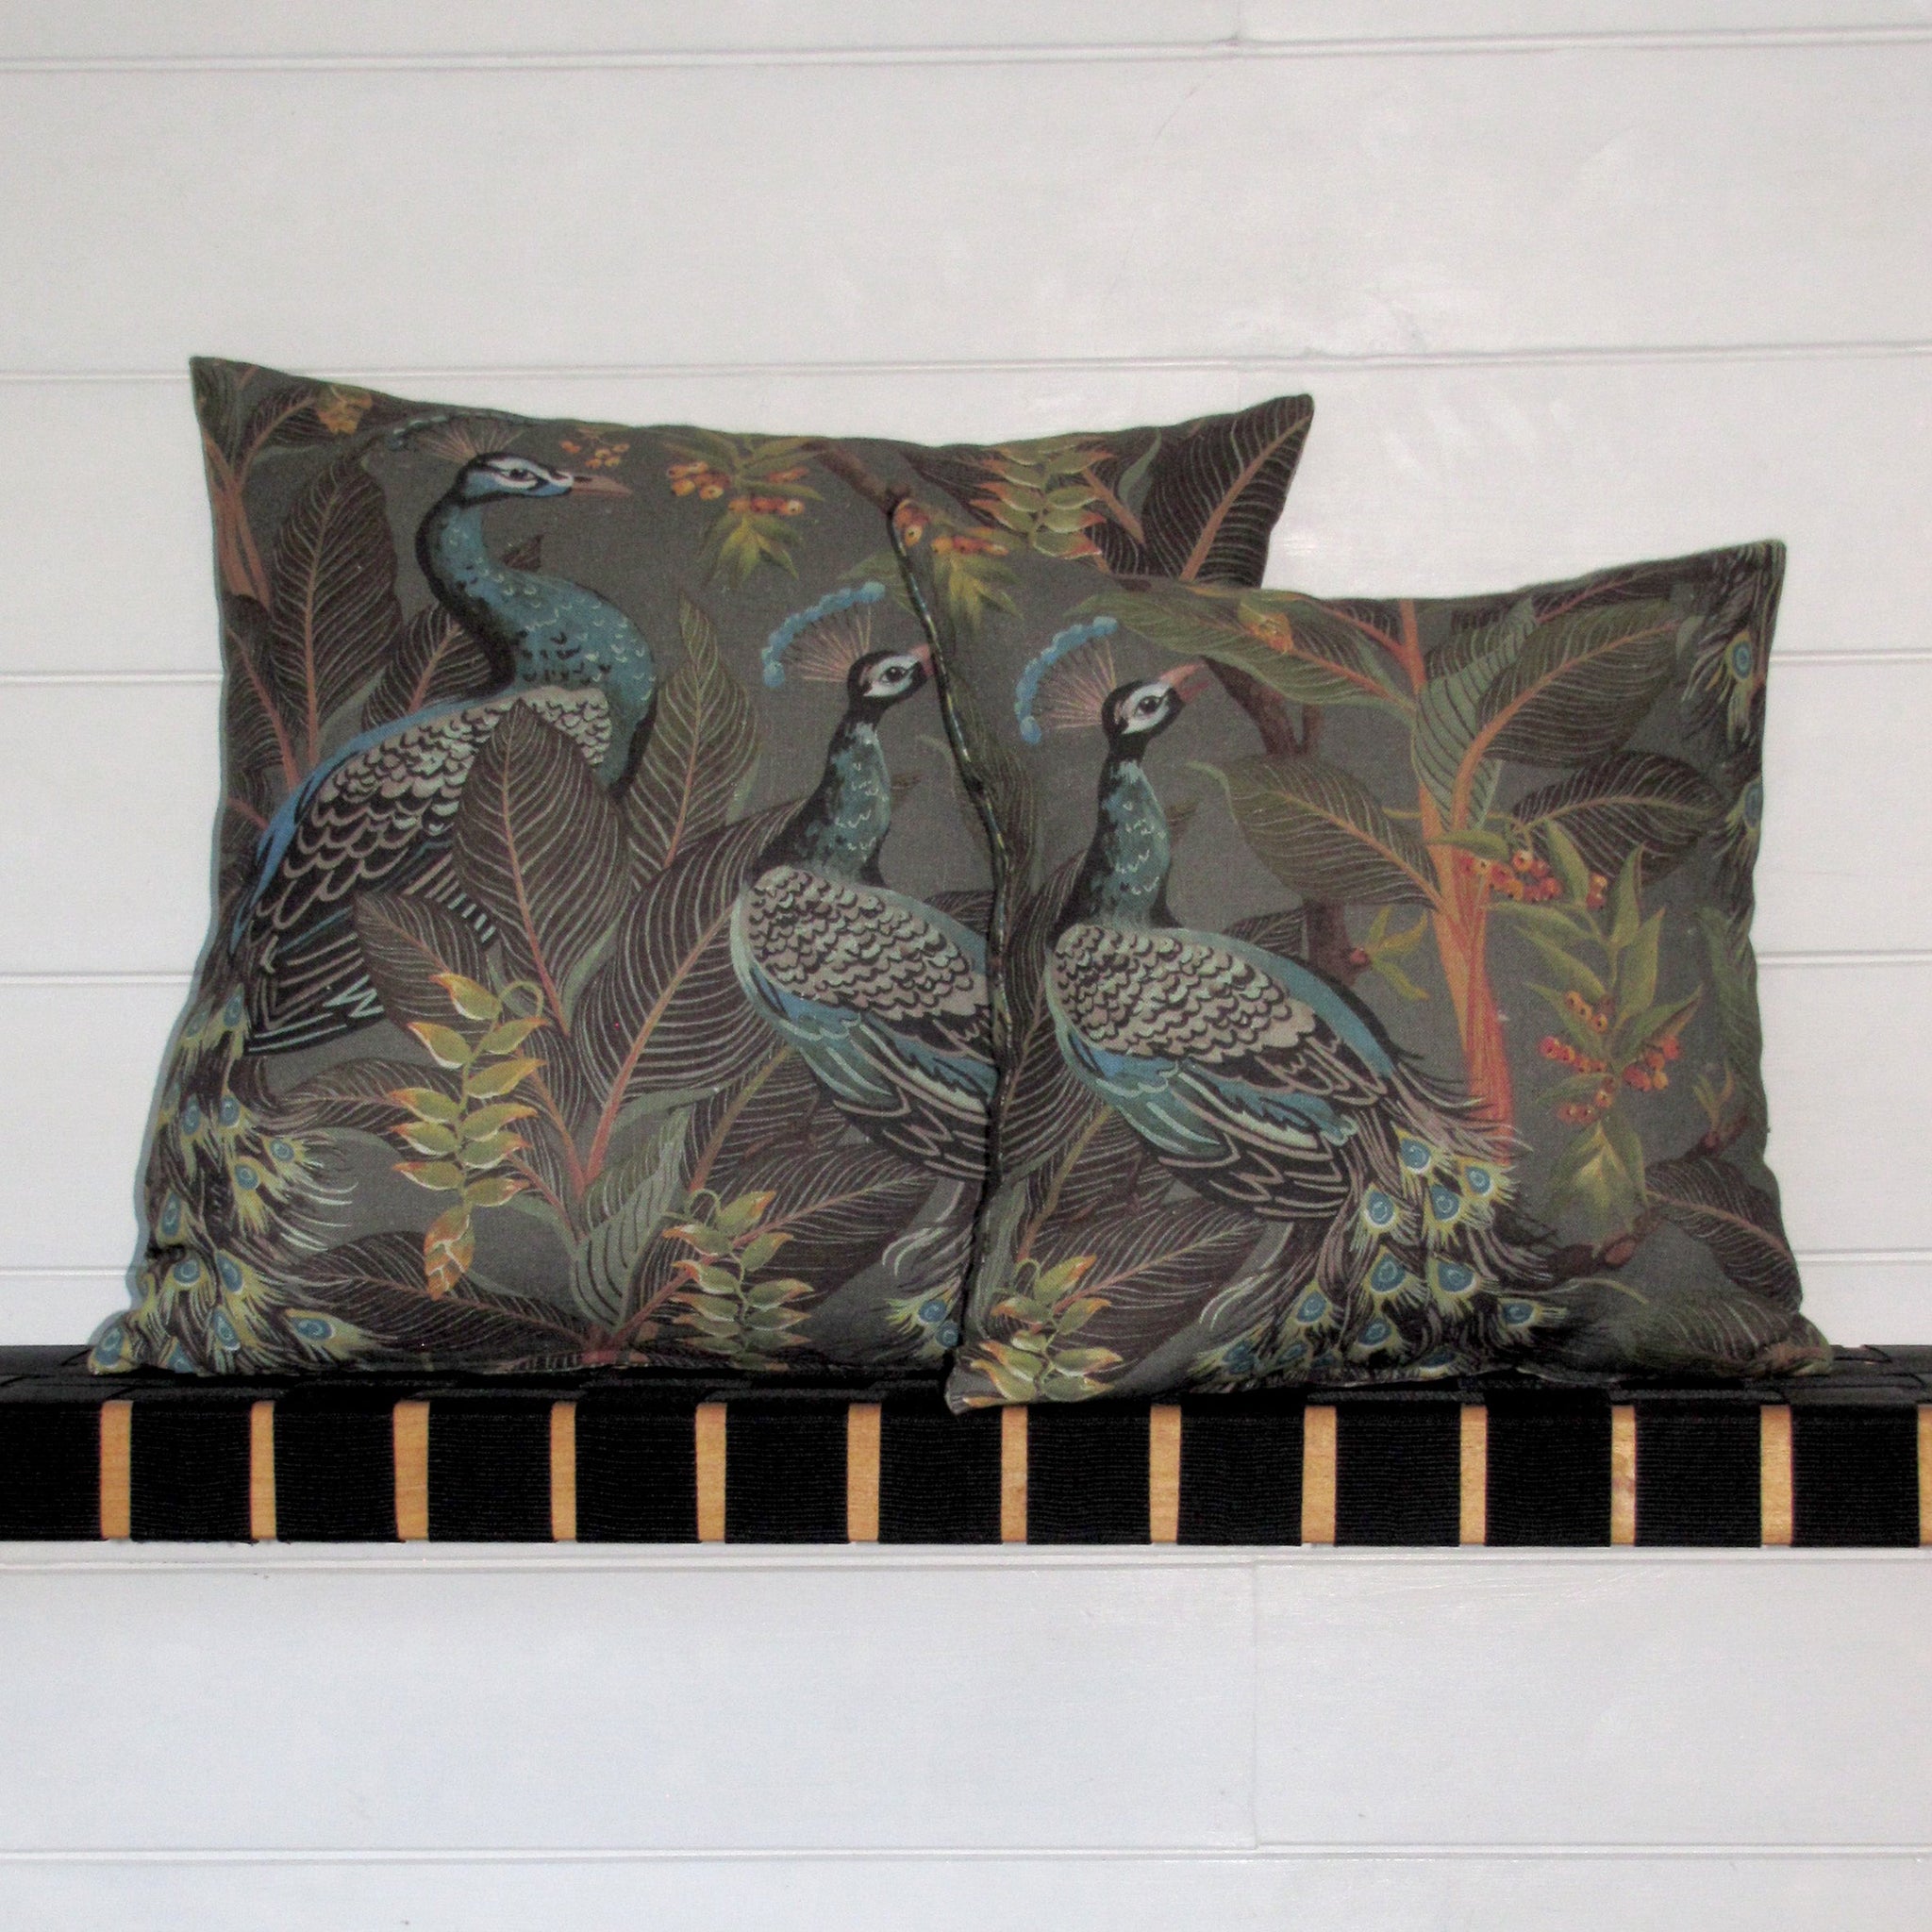 made to order Royal Peacock linen cushion cover